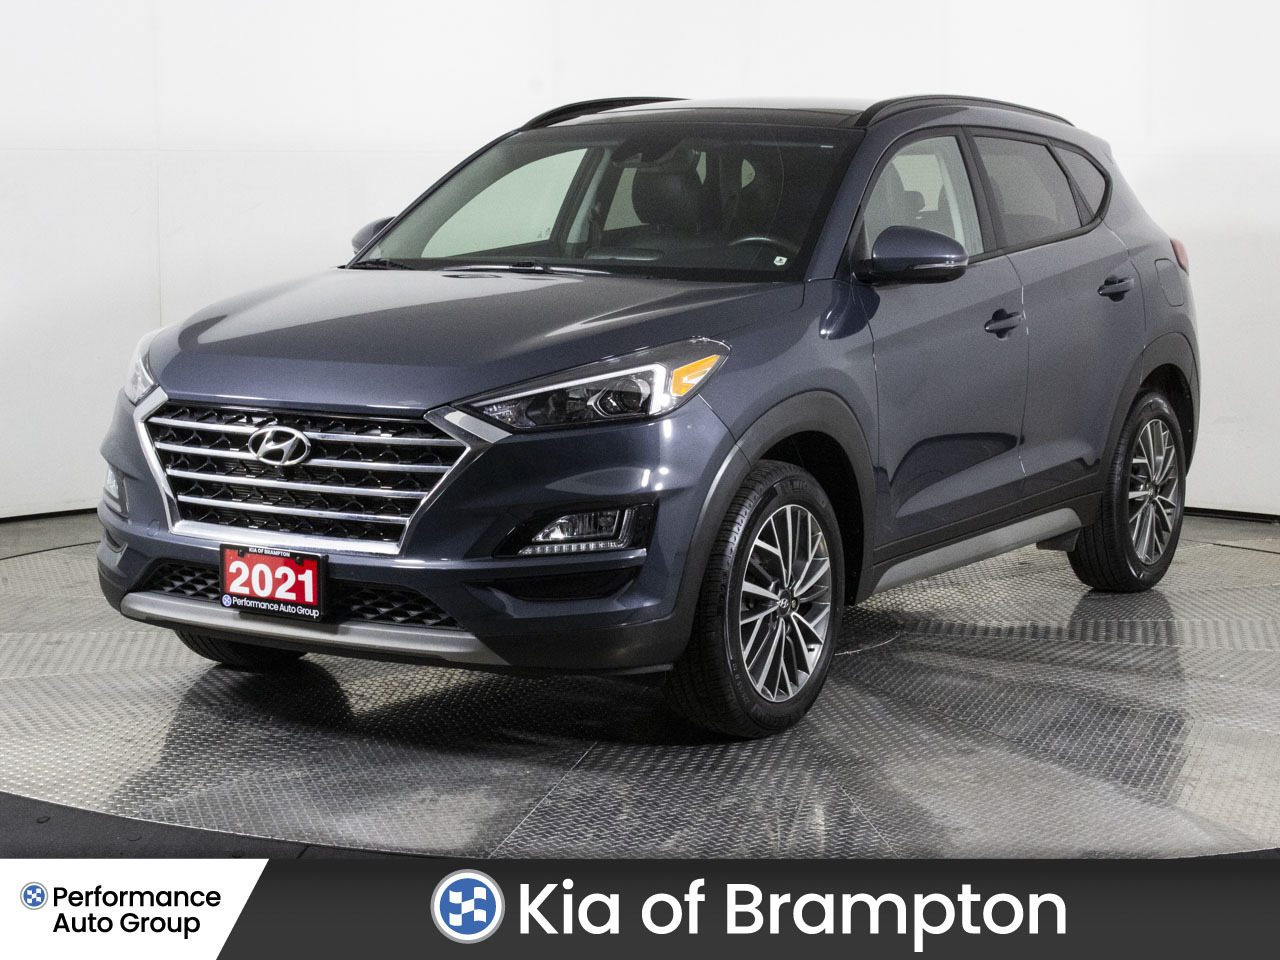 2021 Hyundai Tucson I'M SOLD PENDING DELIVERY